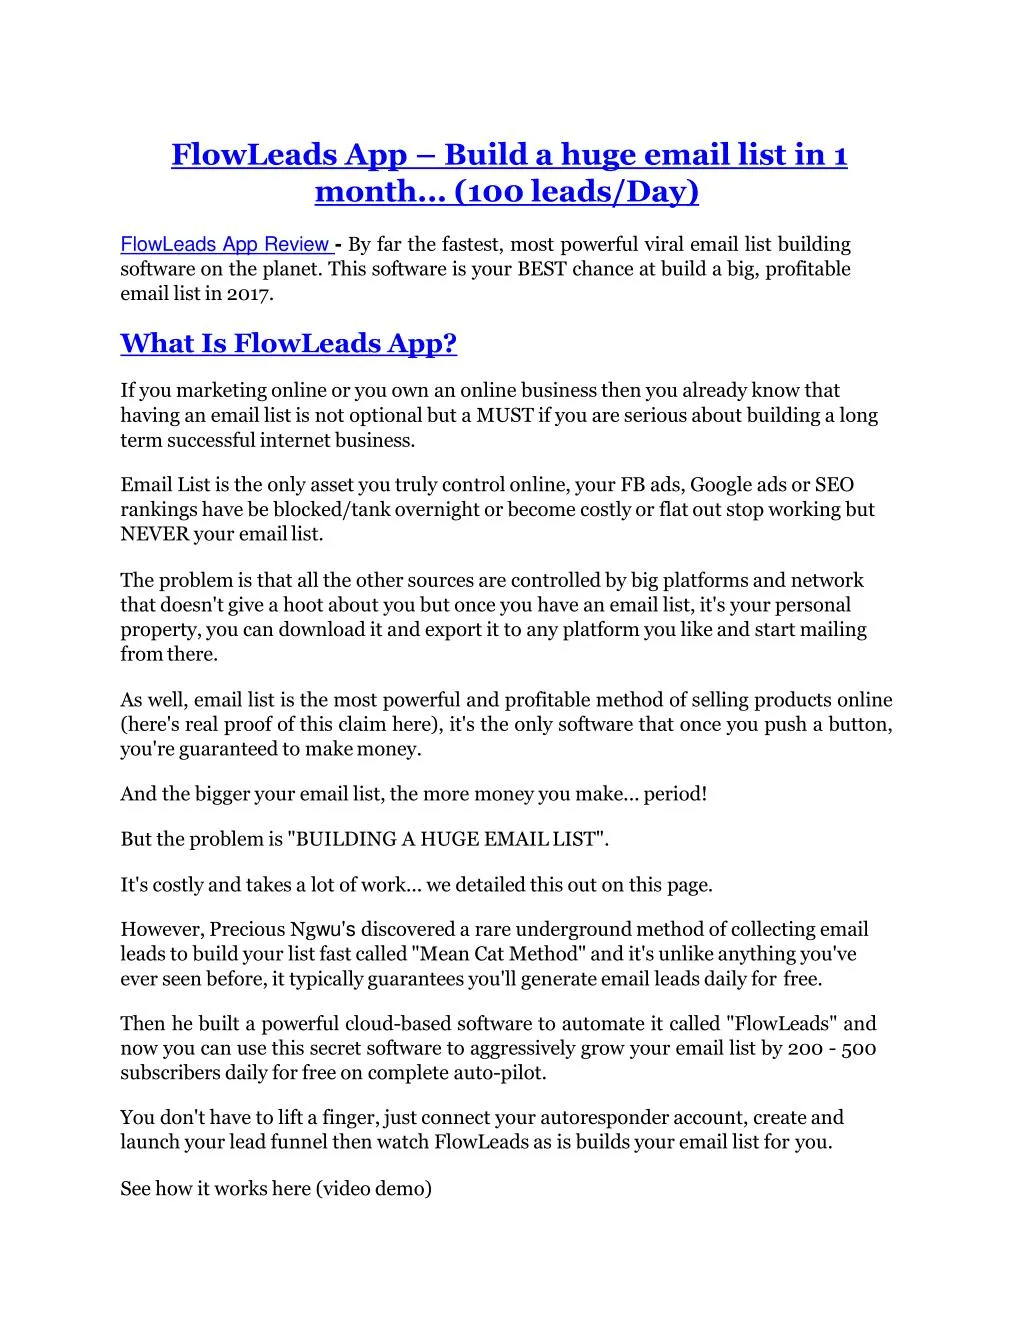 flowleads app build a huge email list in 1 month